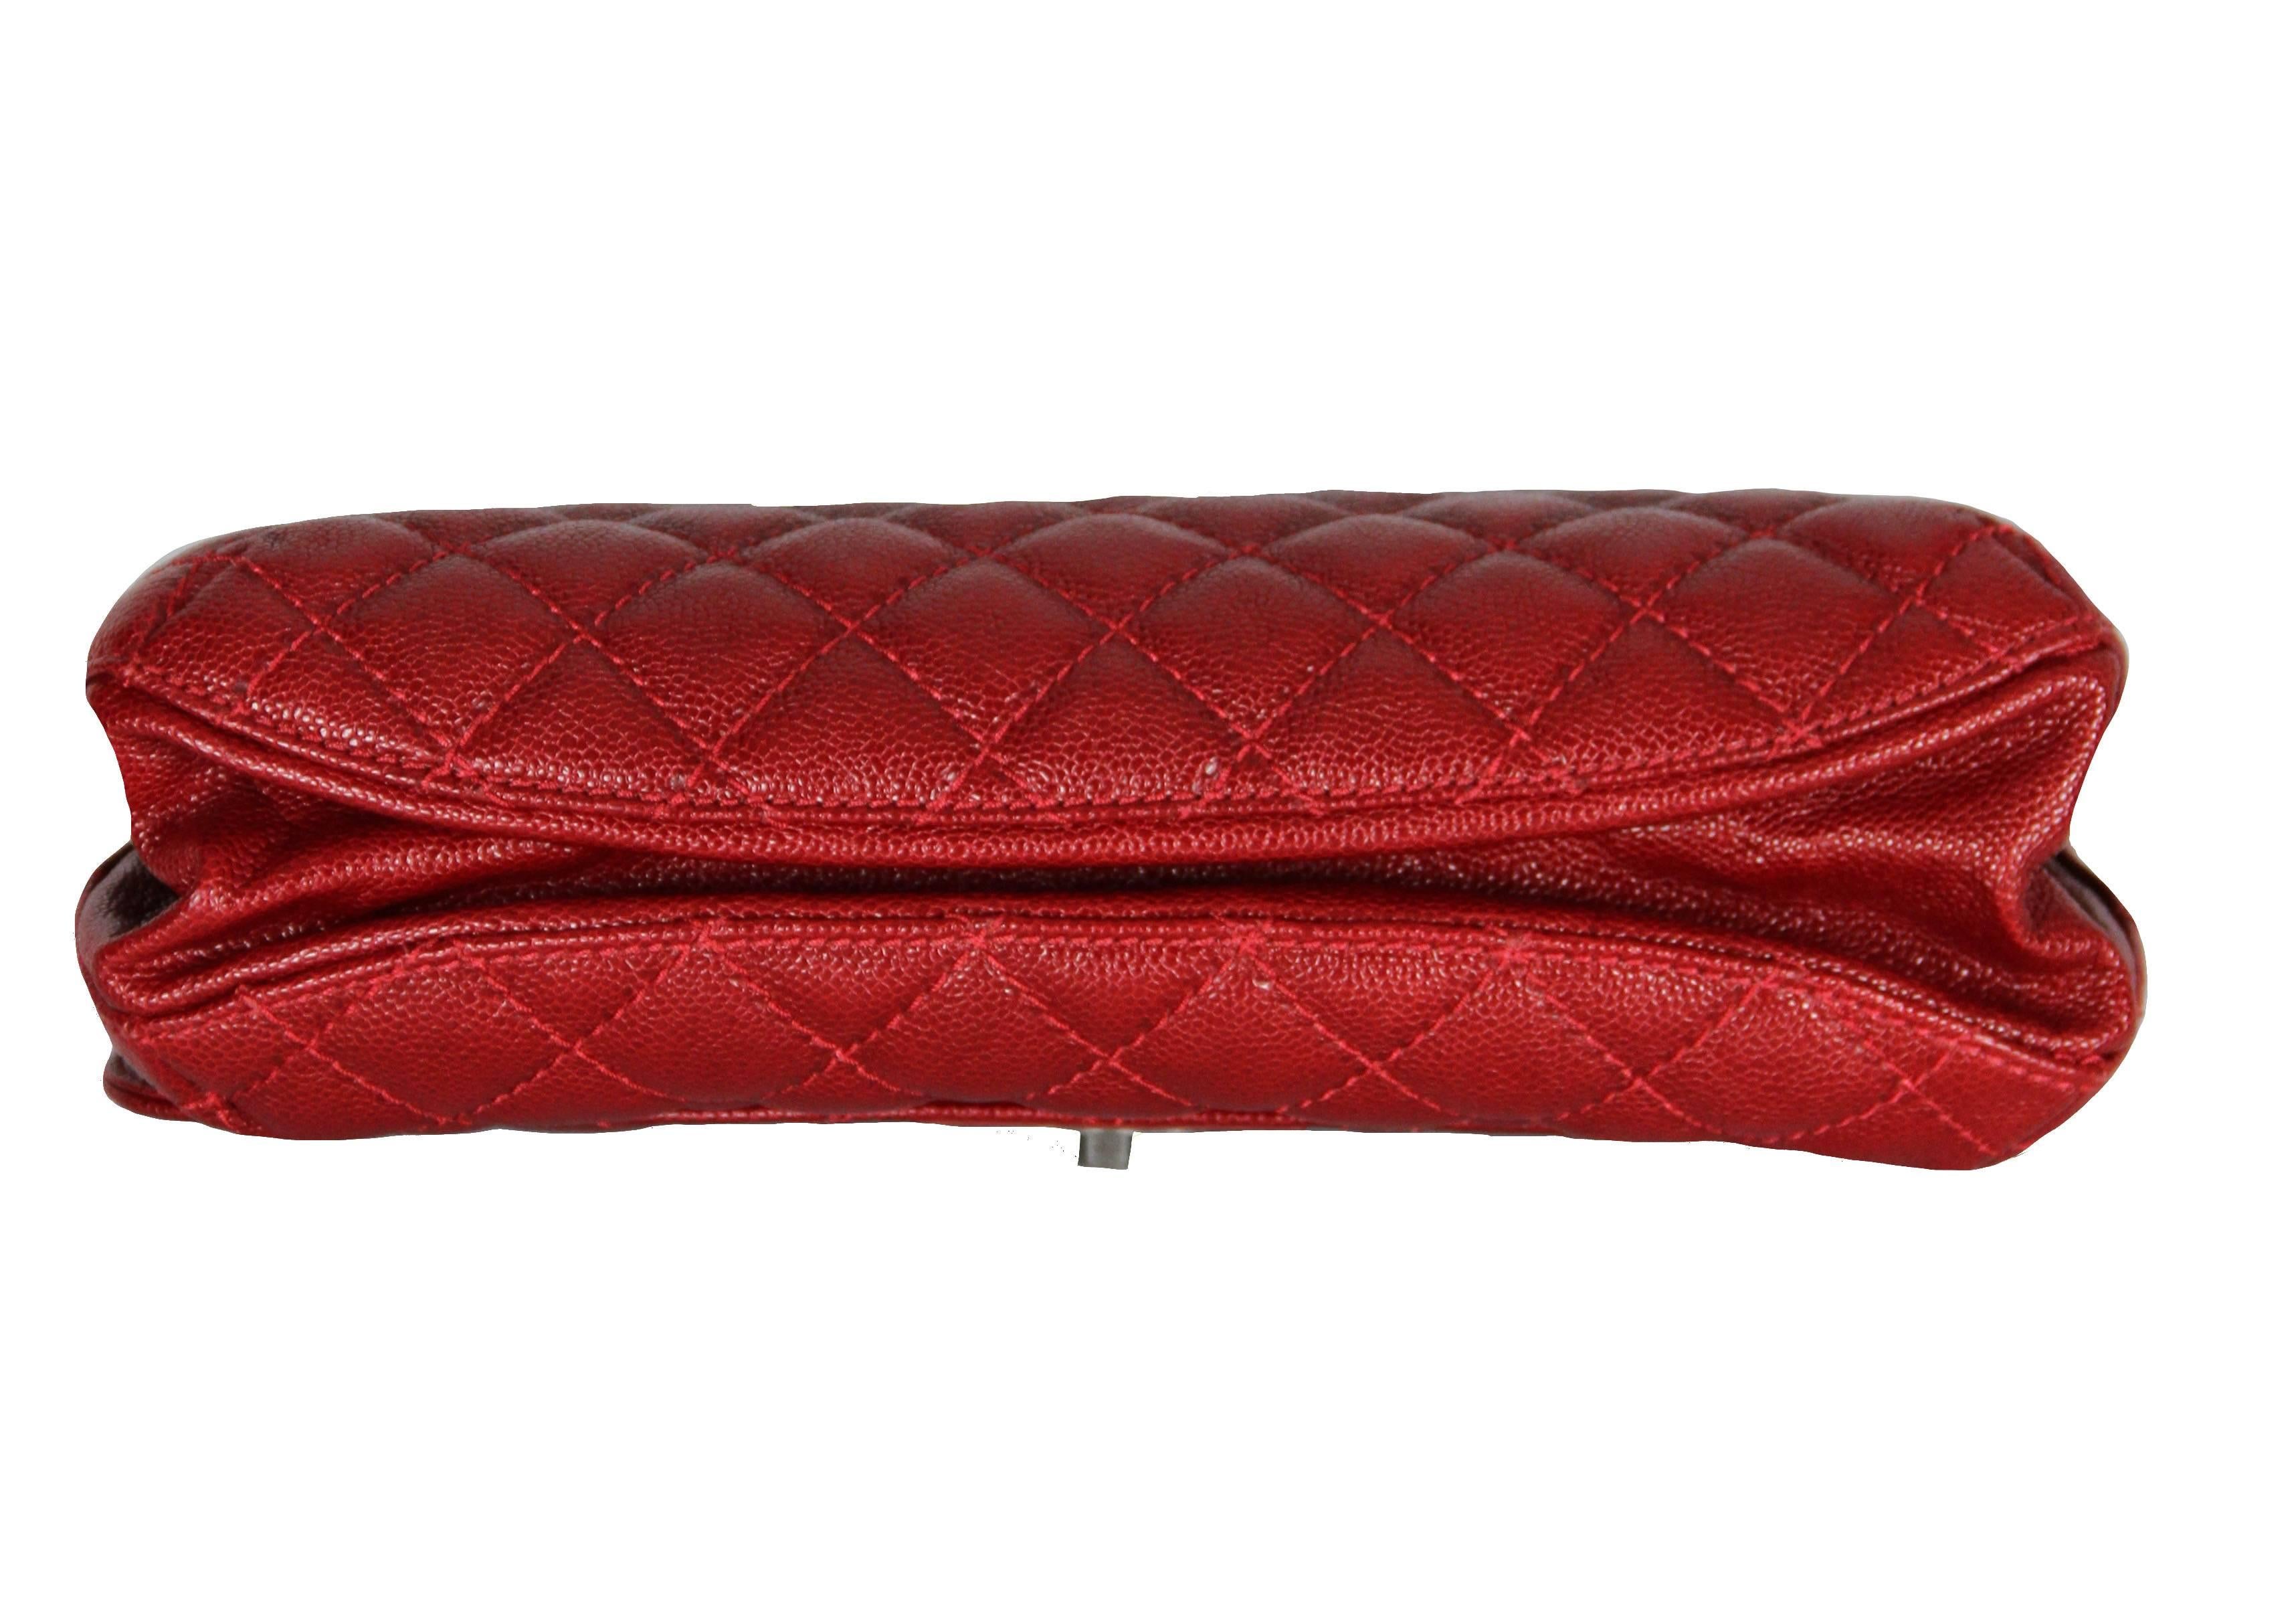 Women's  CHANEL Shiny Red Grained Leather Messenger Bag 